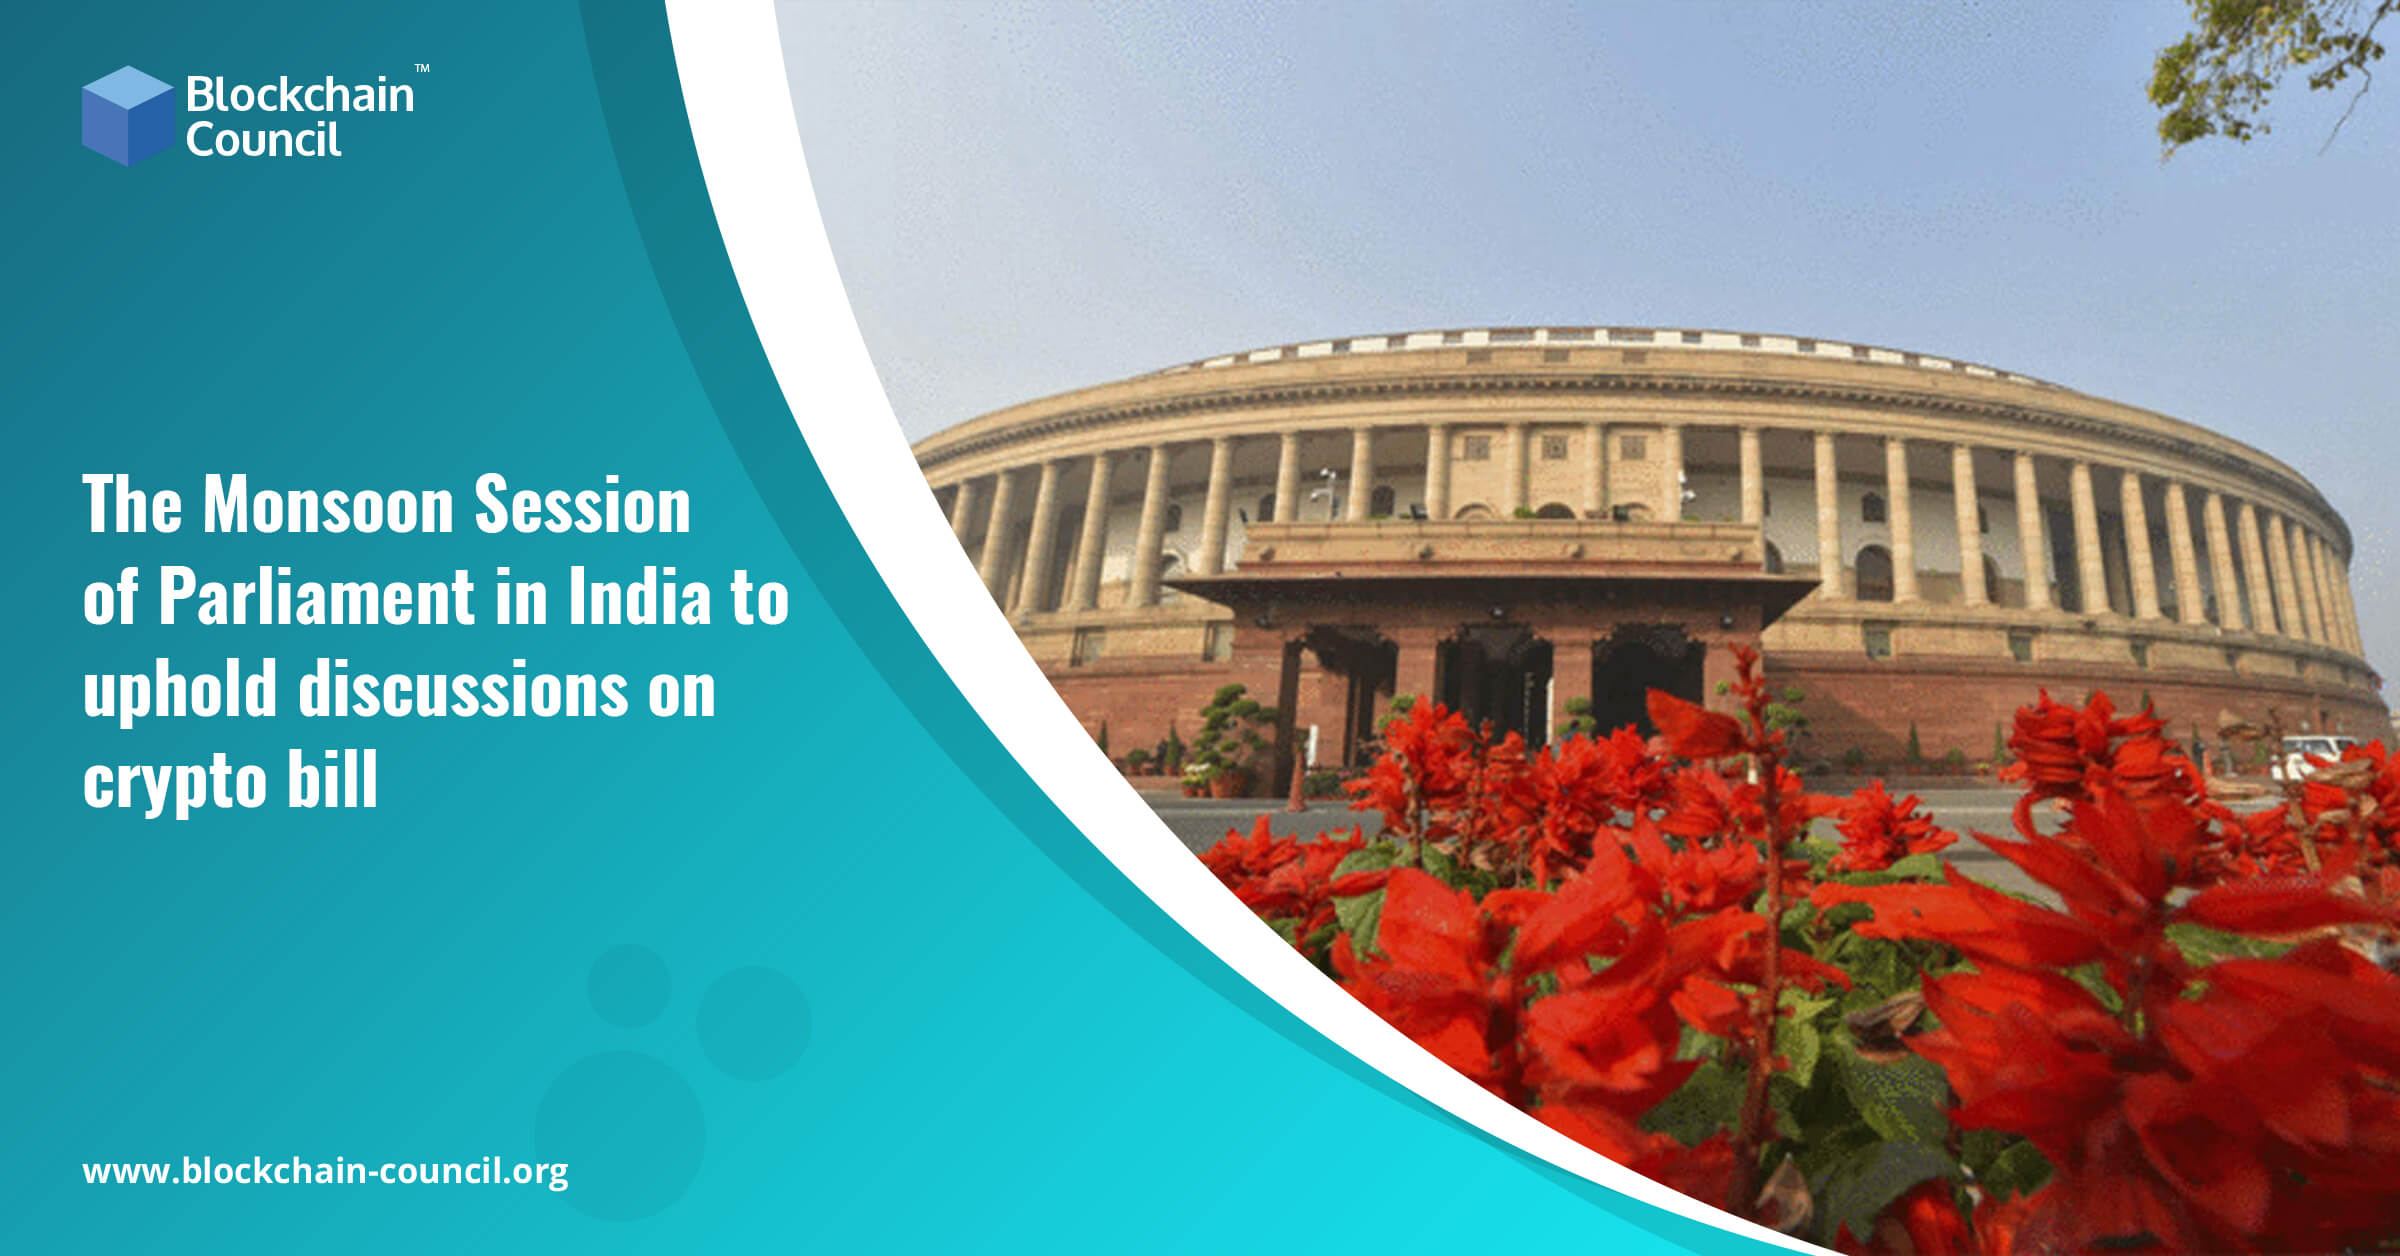 The Monsoon Session of Parliament in India to uphold discussions on crypto bill